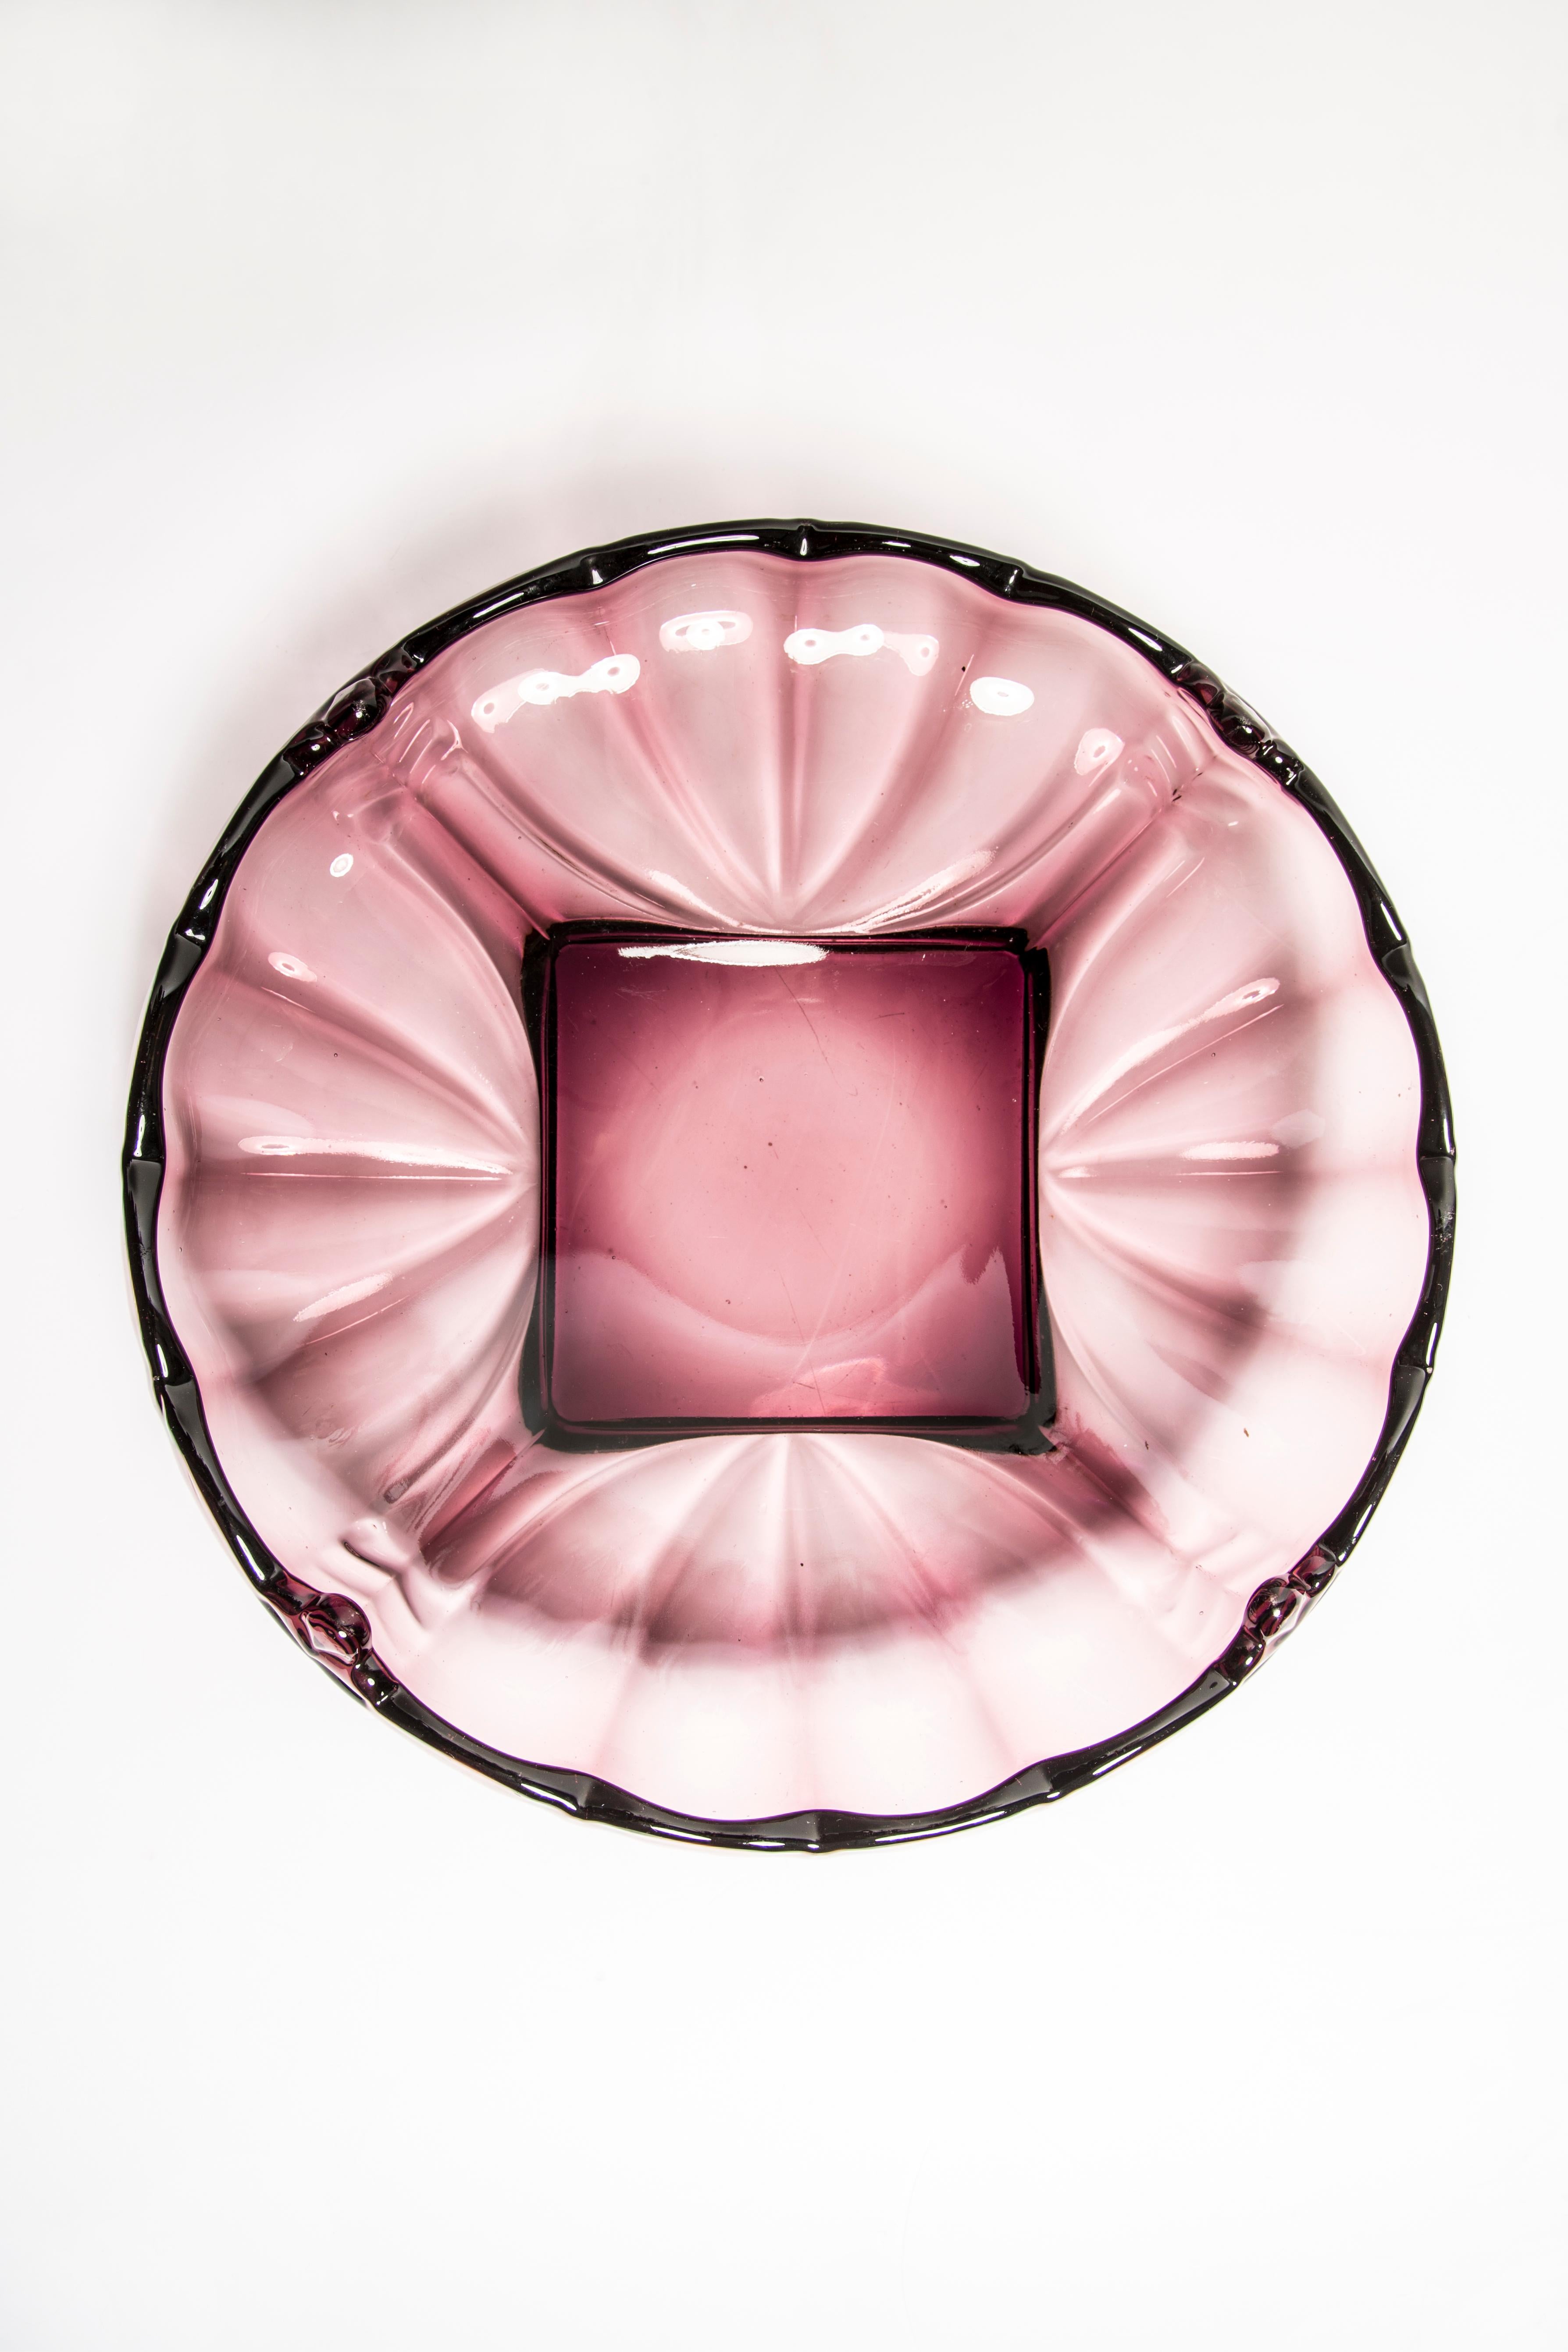 20th Century Vintage Light Purple Decorative Glass Plate, Italy, 1960s For Sale